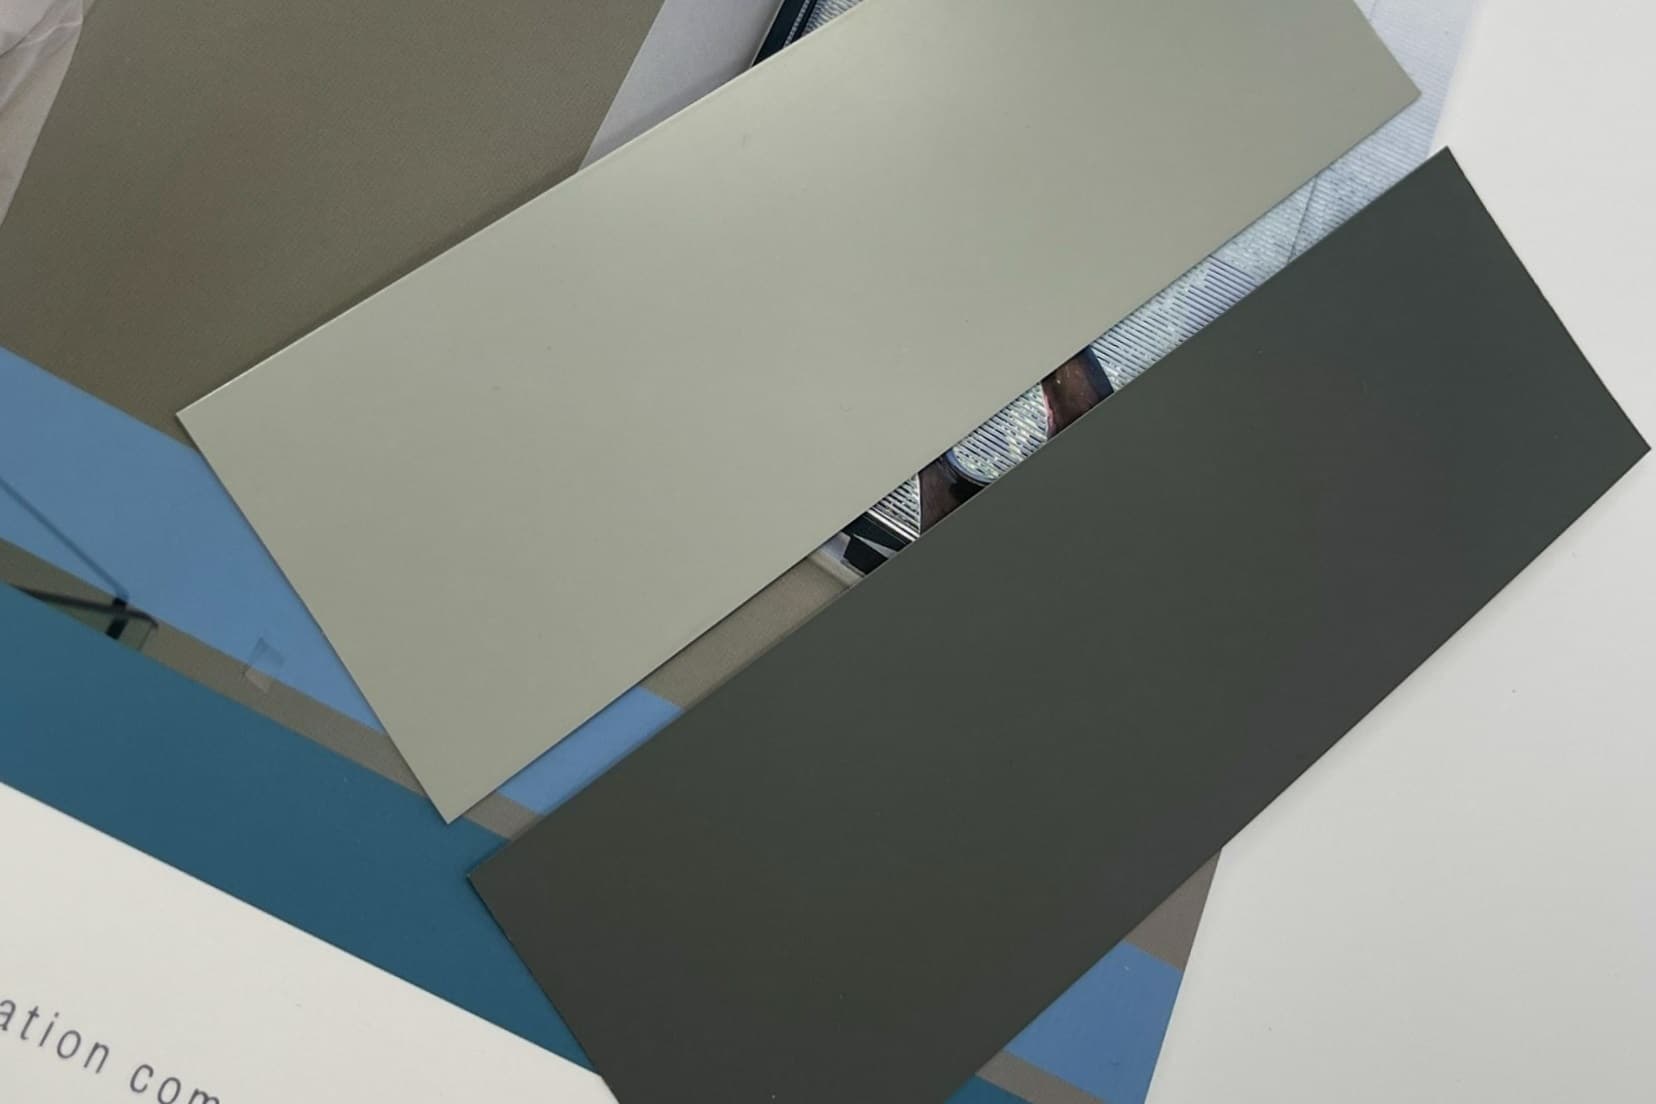 New integral blind colours to make debut at 2023 FIT Show